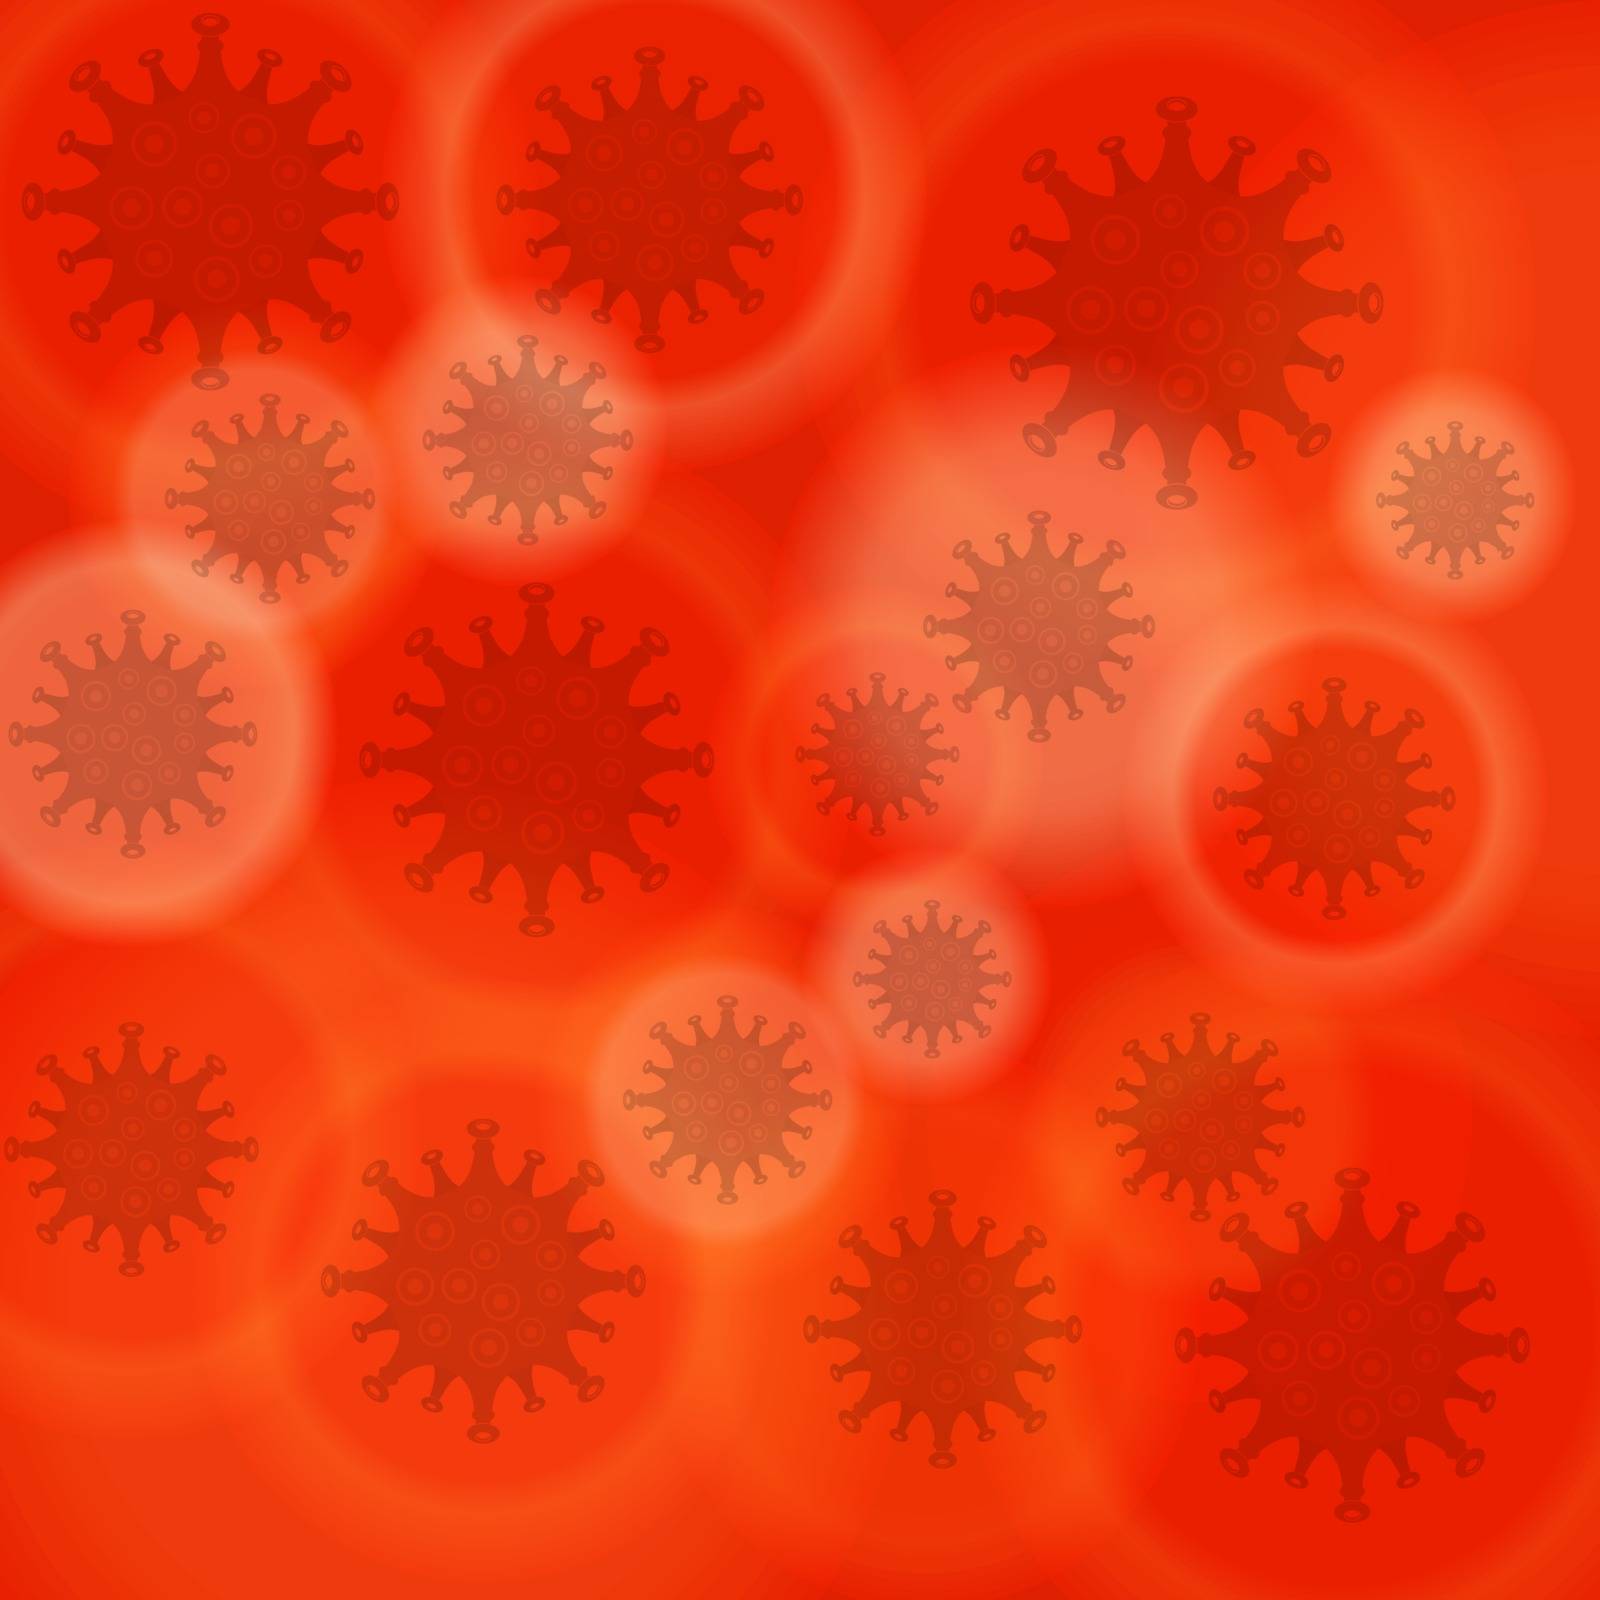 Stop Pandemic Novel Coronavirus Sign on Red Blurred Background. COVID-19.